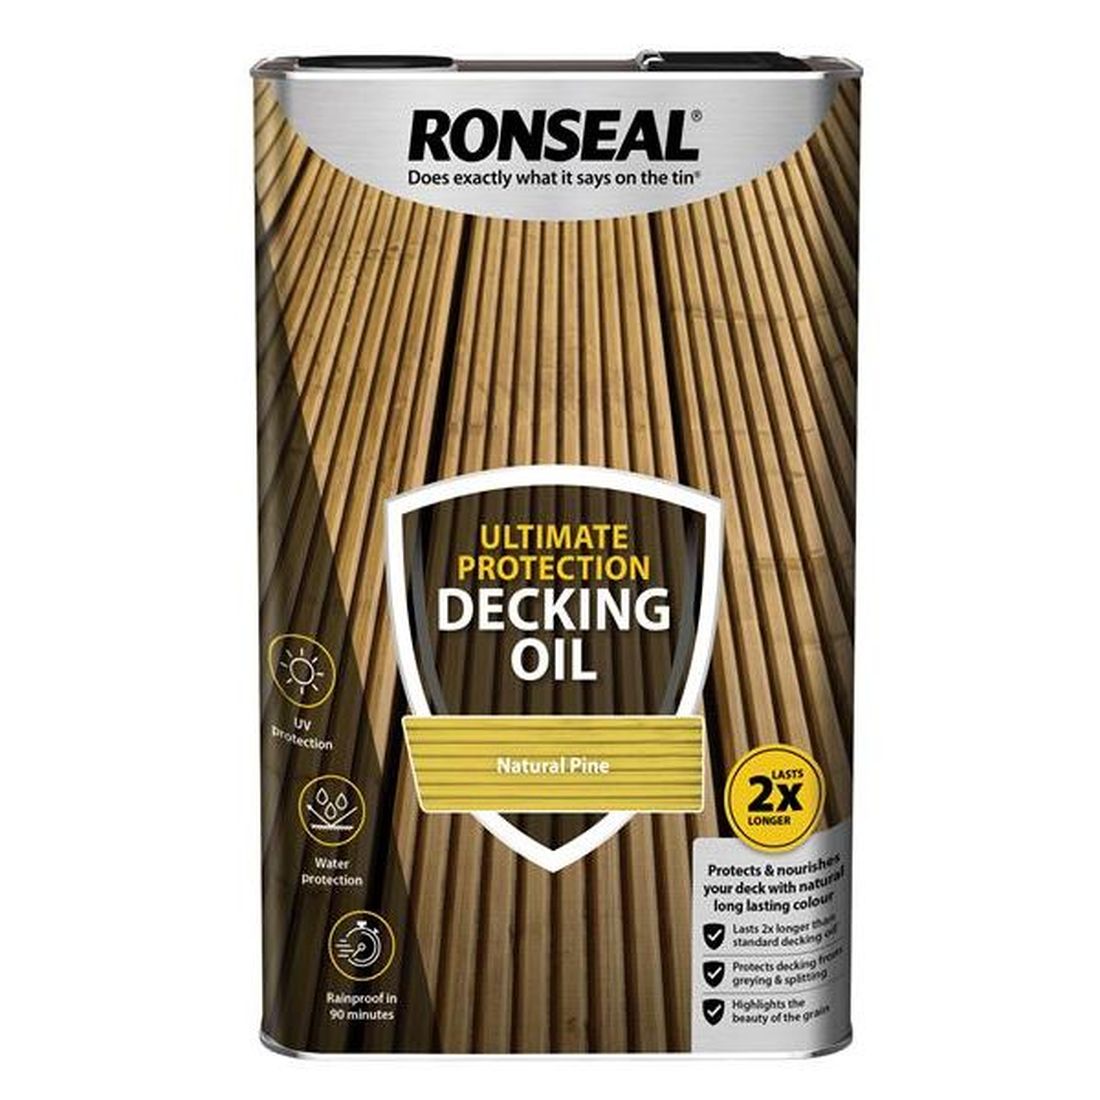 Ronseal Ultimate Protection Decking Oil Natural Pine 5 litre                            